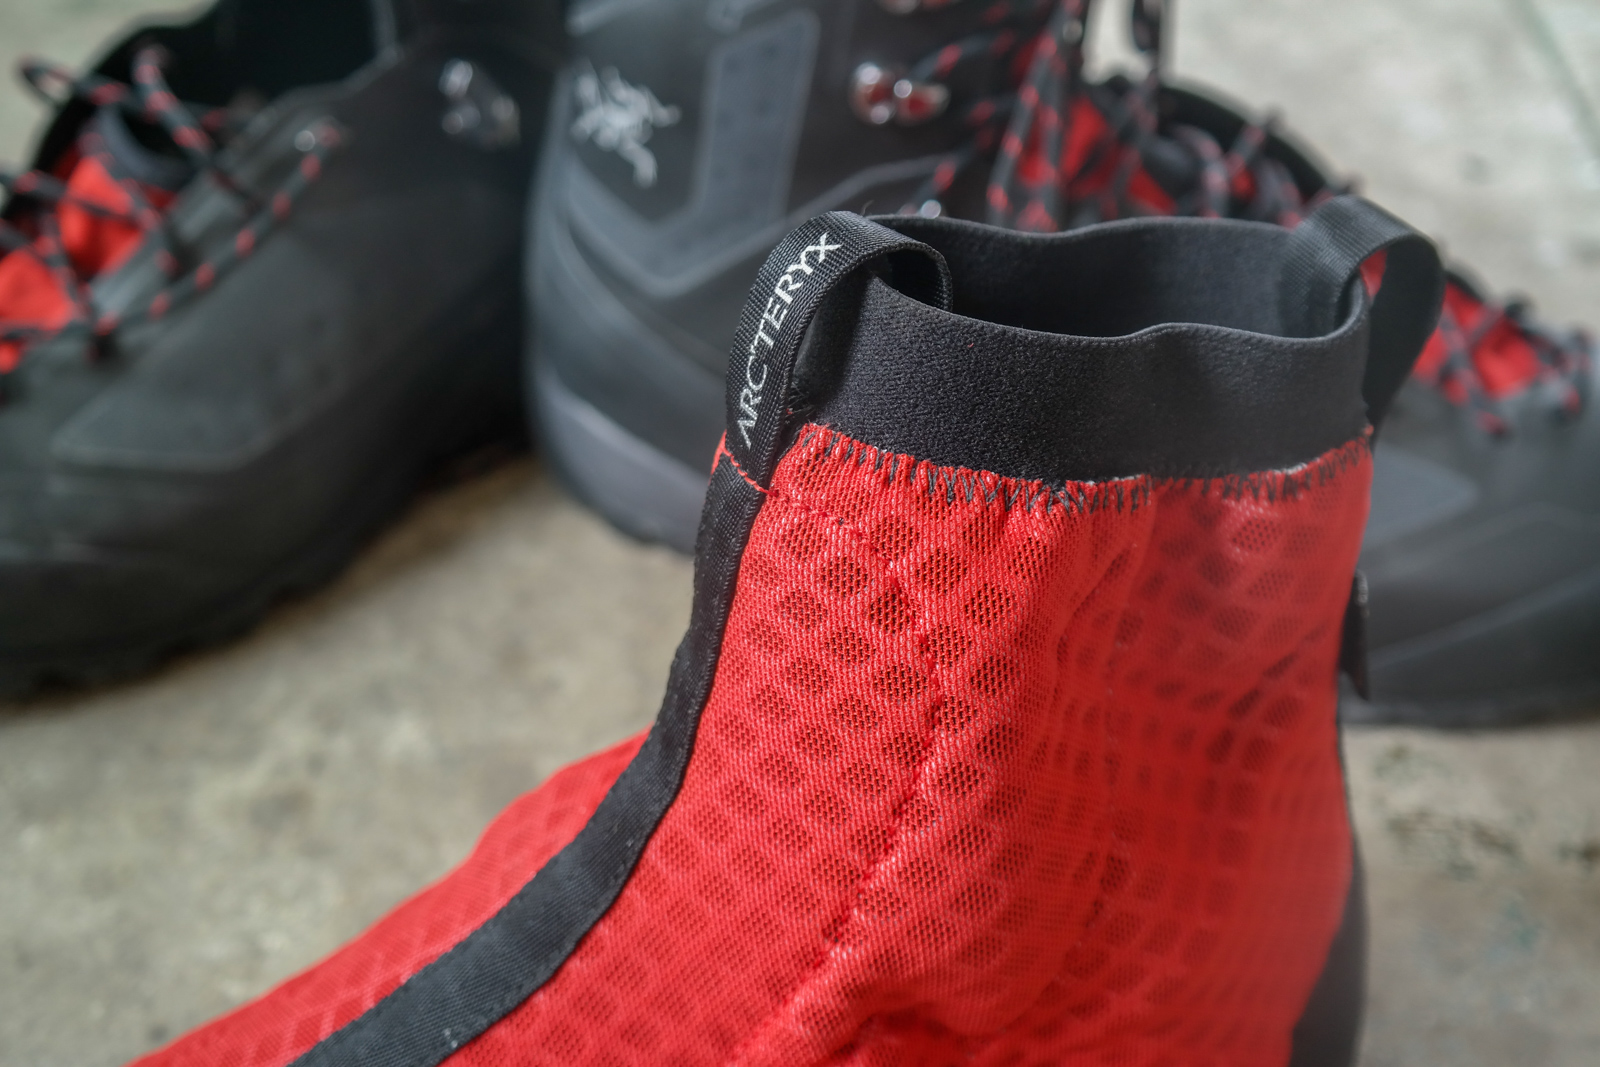 Can Booties Make A Better Hiking Boot?